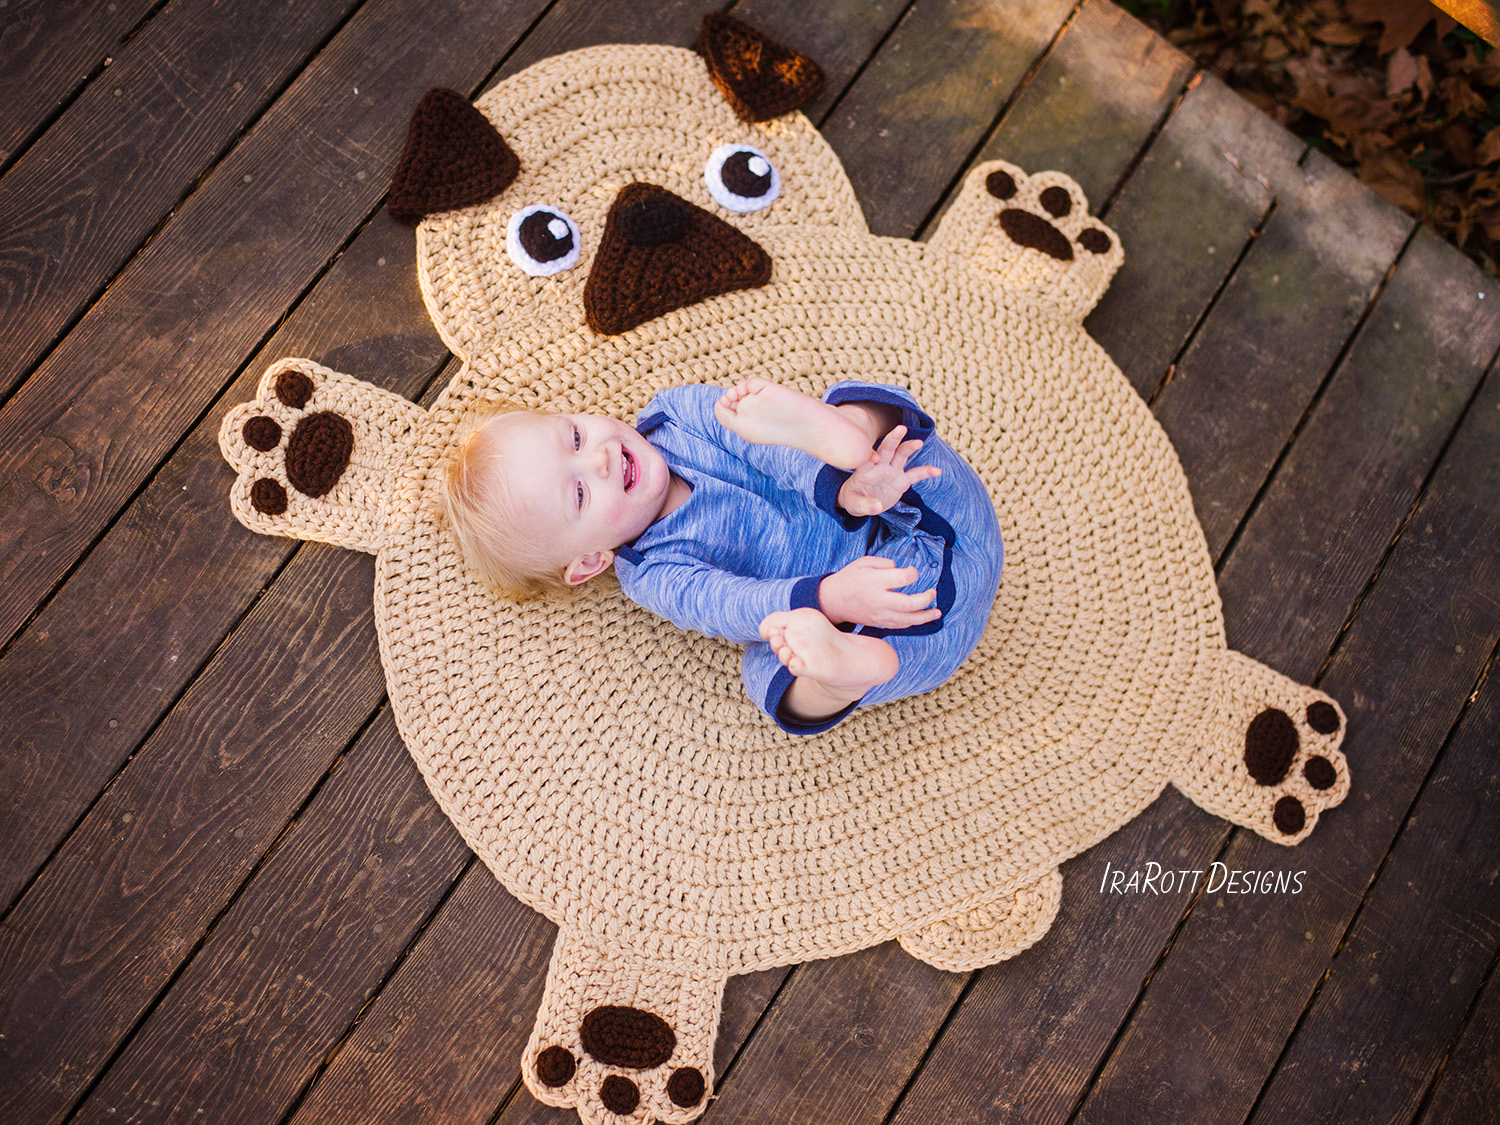 Knitted Pug Pattern The Pugfect Pug Rug Pdf Crochet Pattern